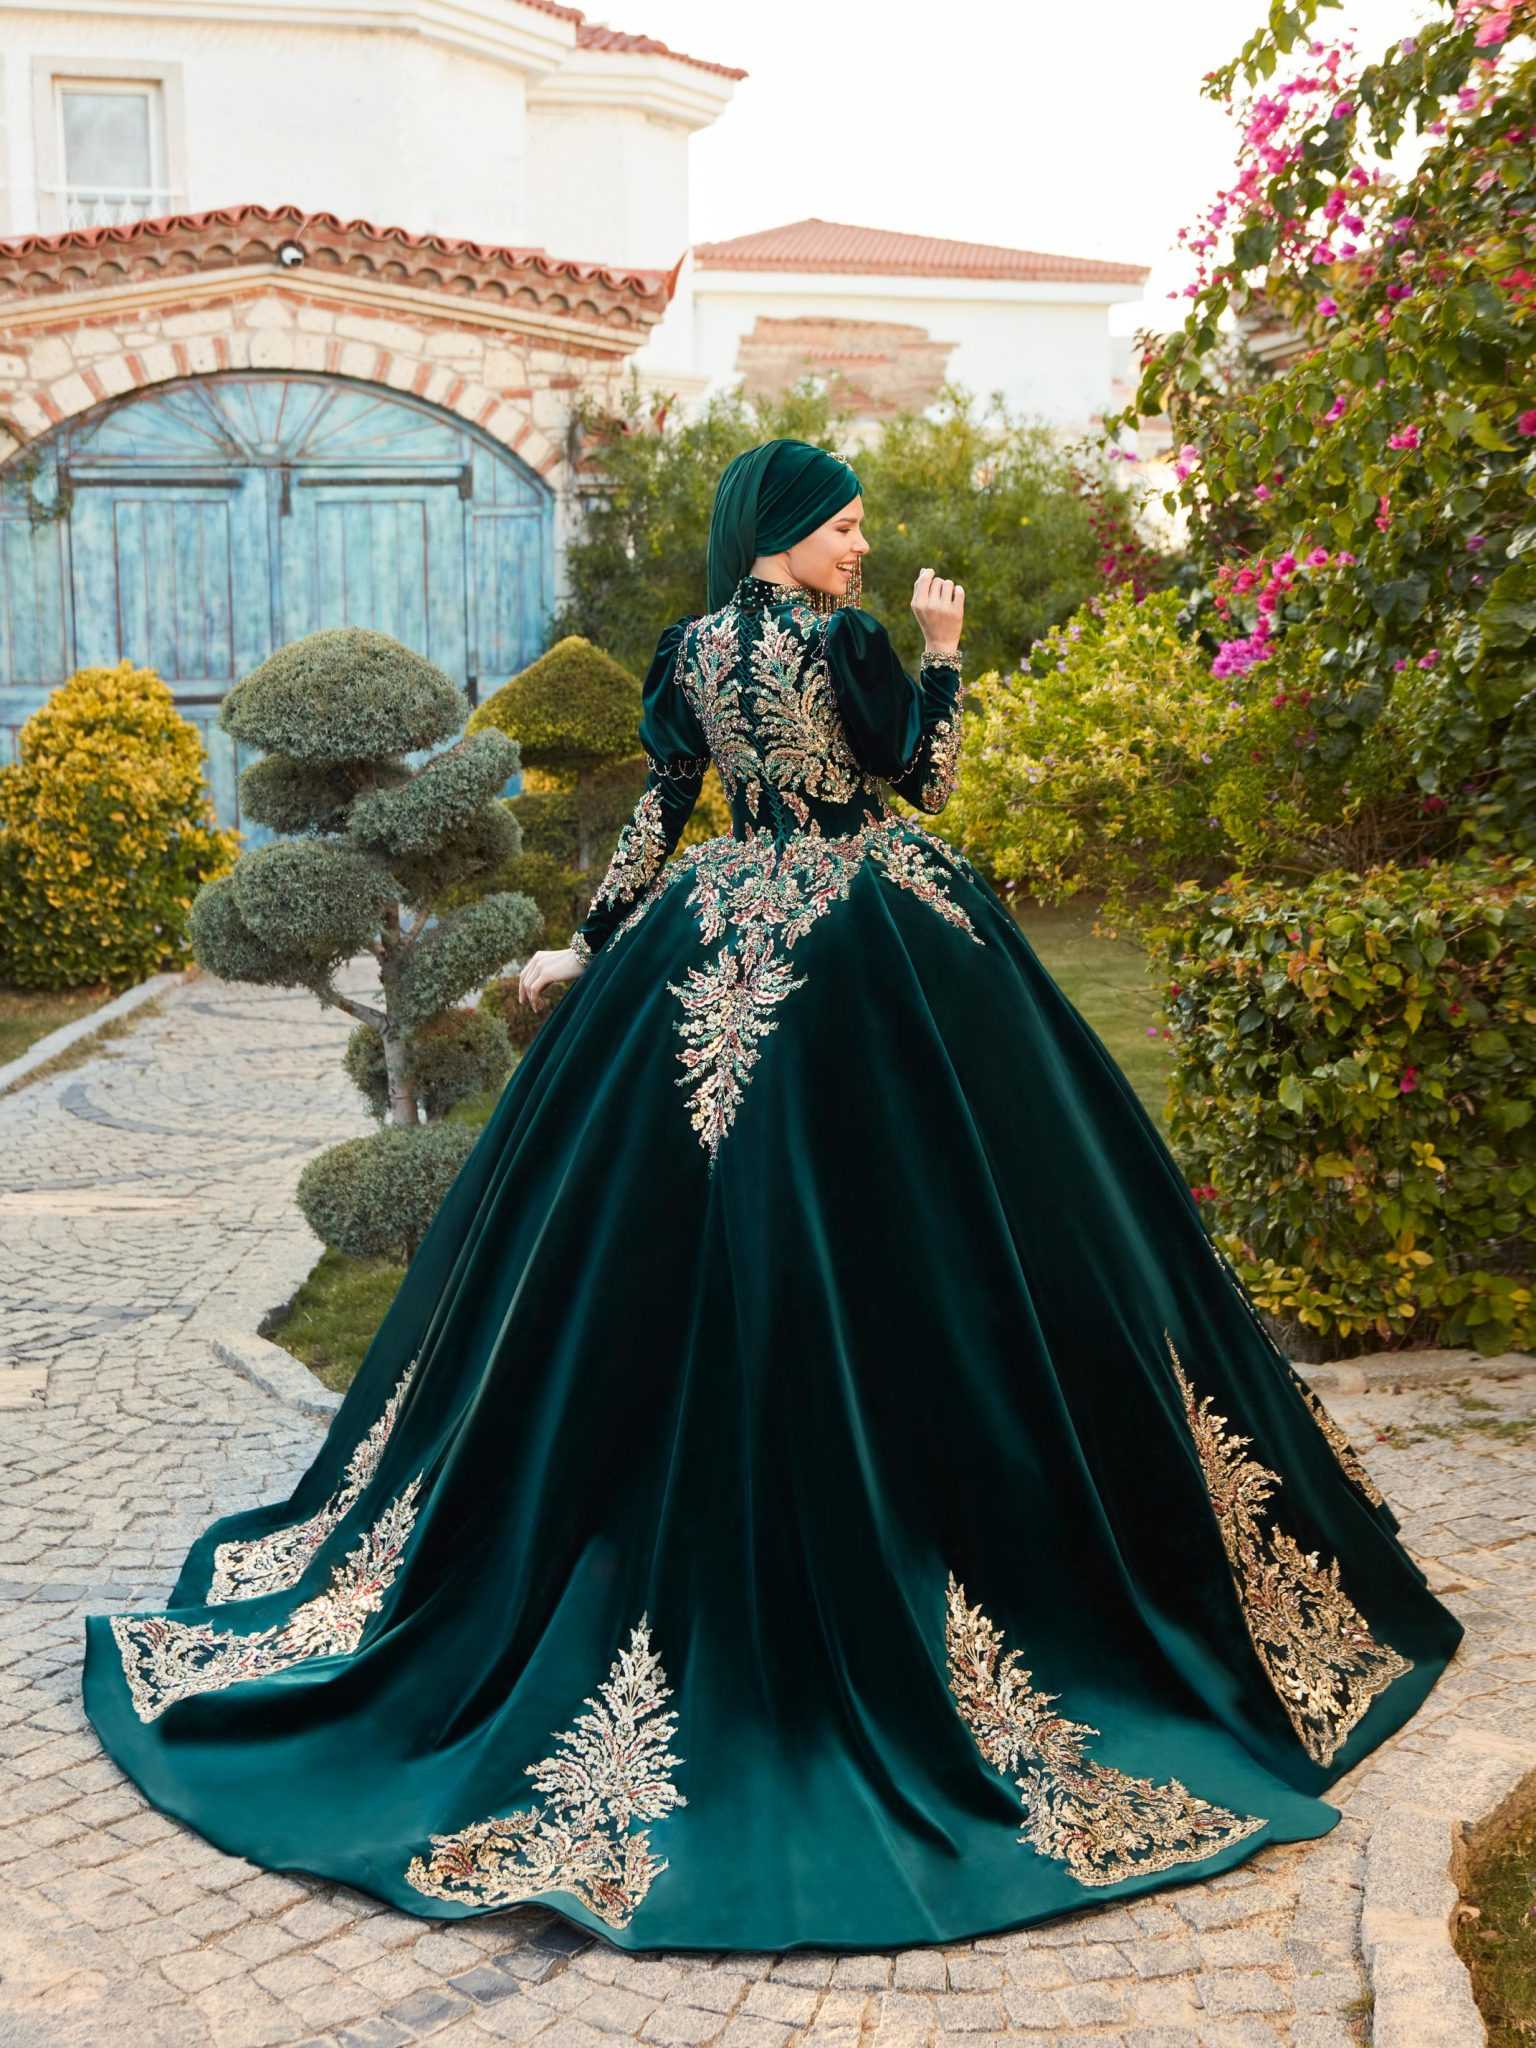 buy Muslim Style Emerald Green Juliet Sleeve Bridal Ball Gown For Henna Party online party dresses boutique